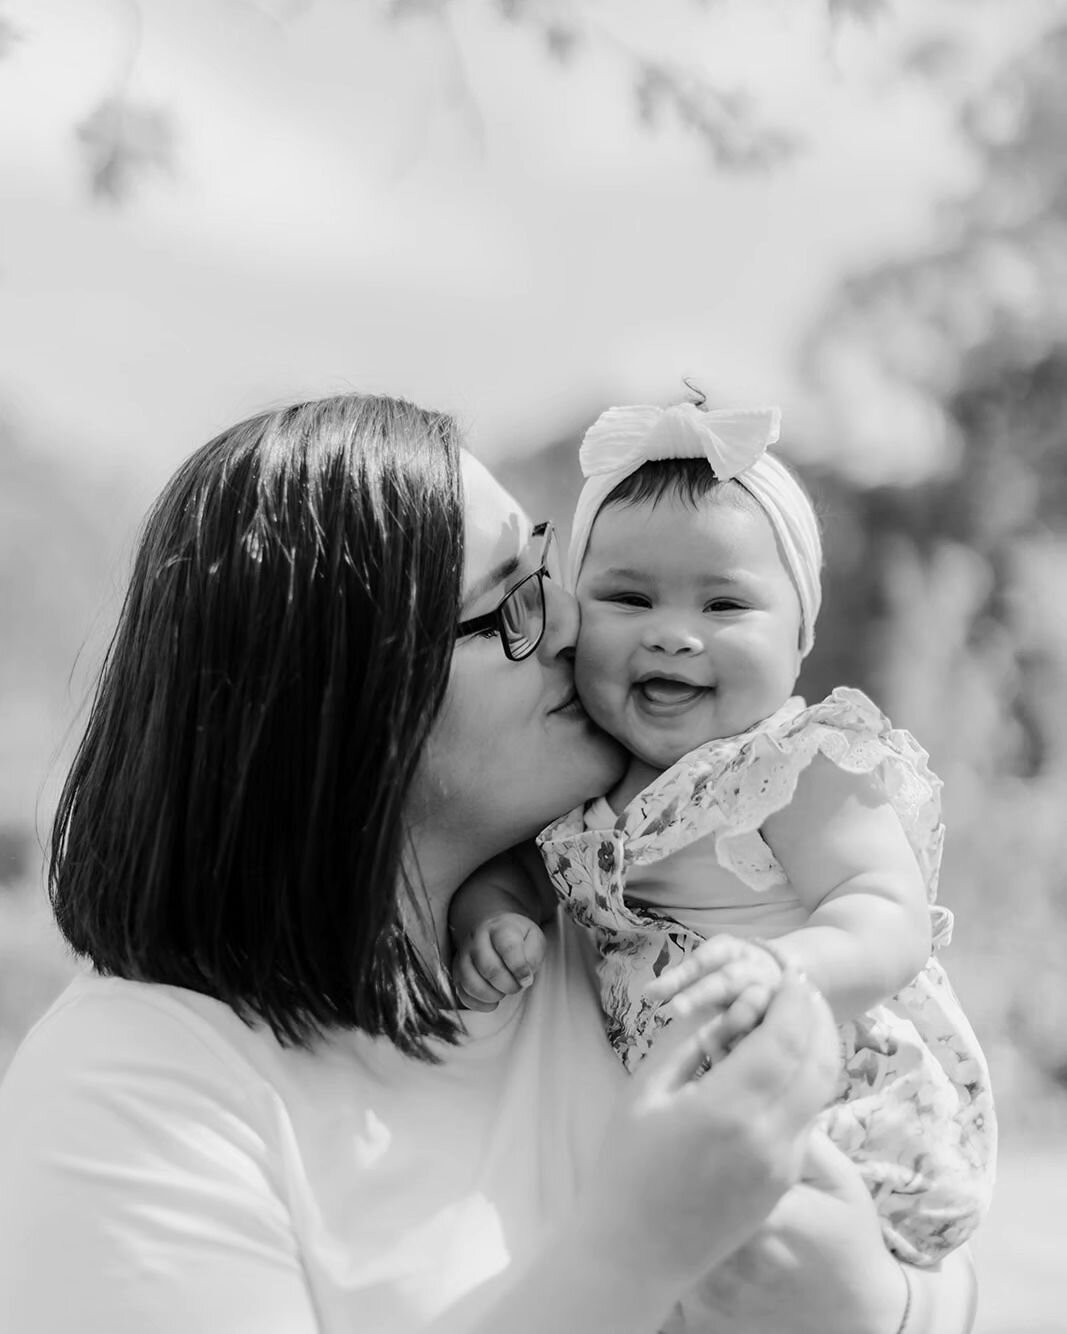 Sweet Mumma and baby moments

I'm so passionate about making sure Mums have loads of precious and special photo memories with their little ones :)

#mothersandbaby #mum #Shannonsmilesphotography #photographer #mothersphotos #love #bubs #blackandwhite